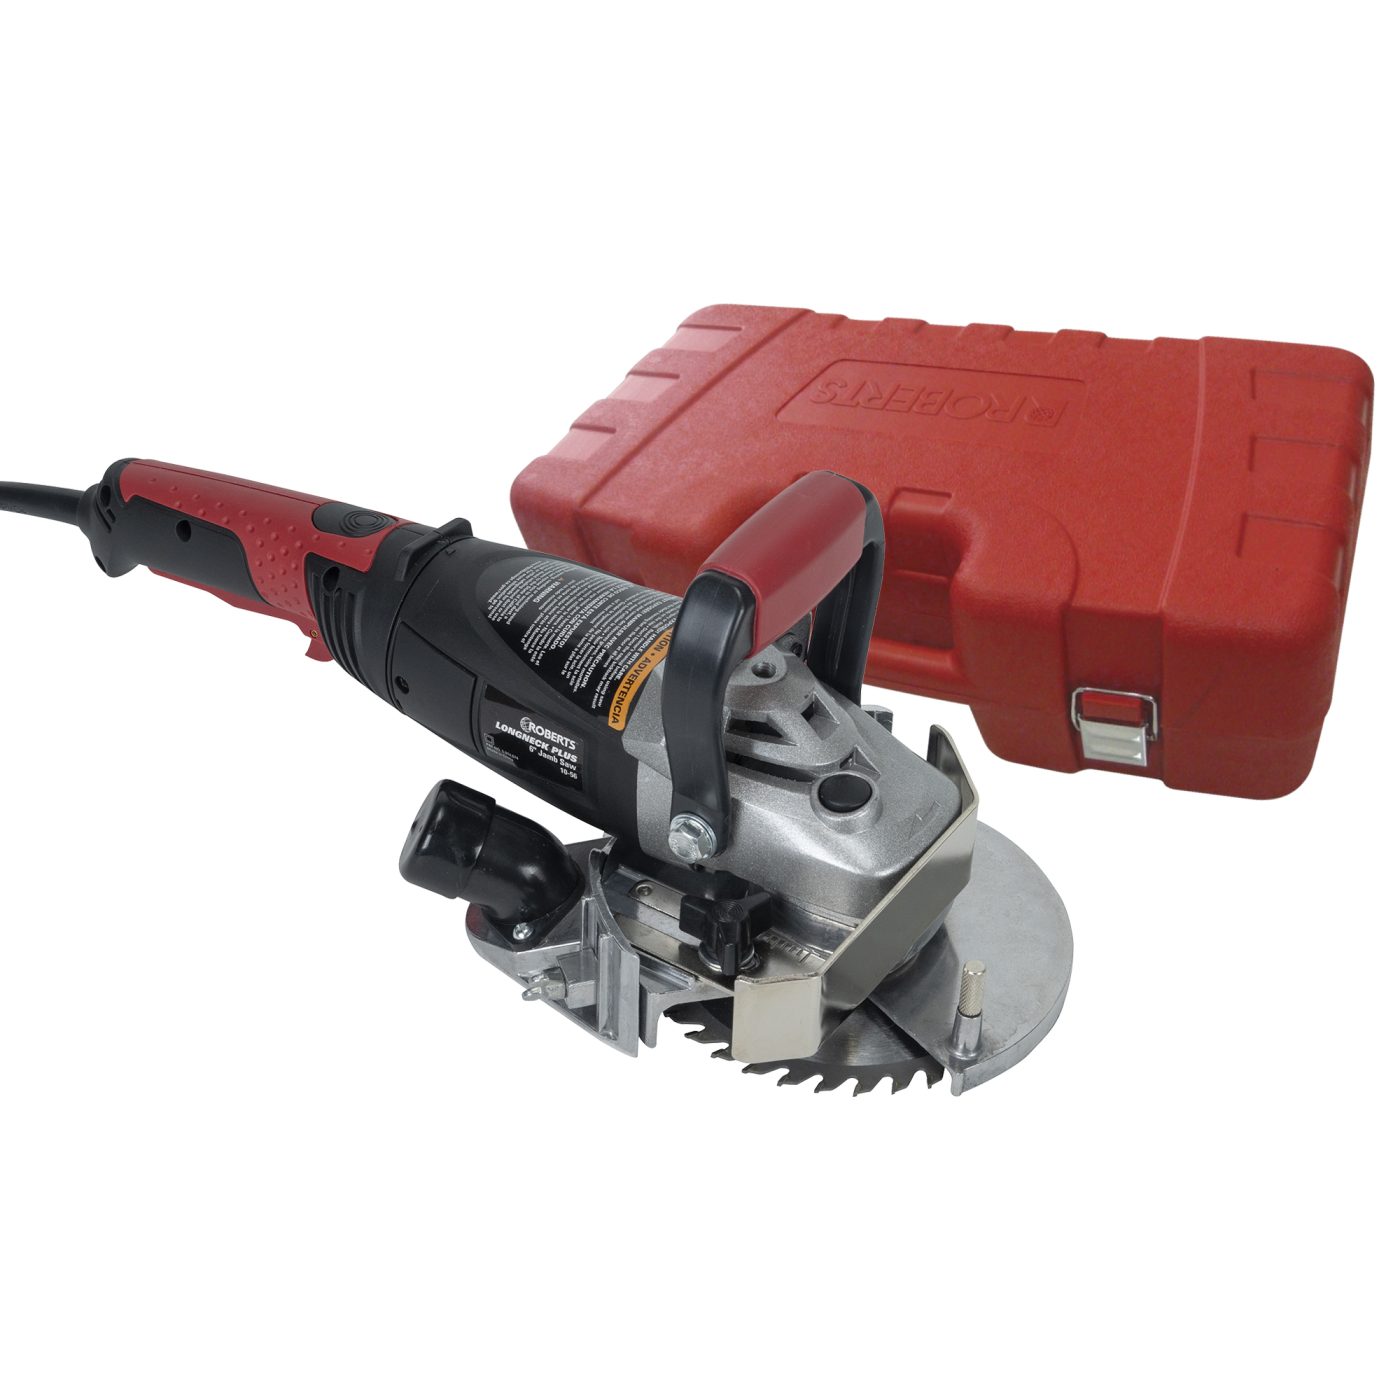 CONVENTIONAL CARPET TRIMMER - Roberts Consolidated